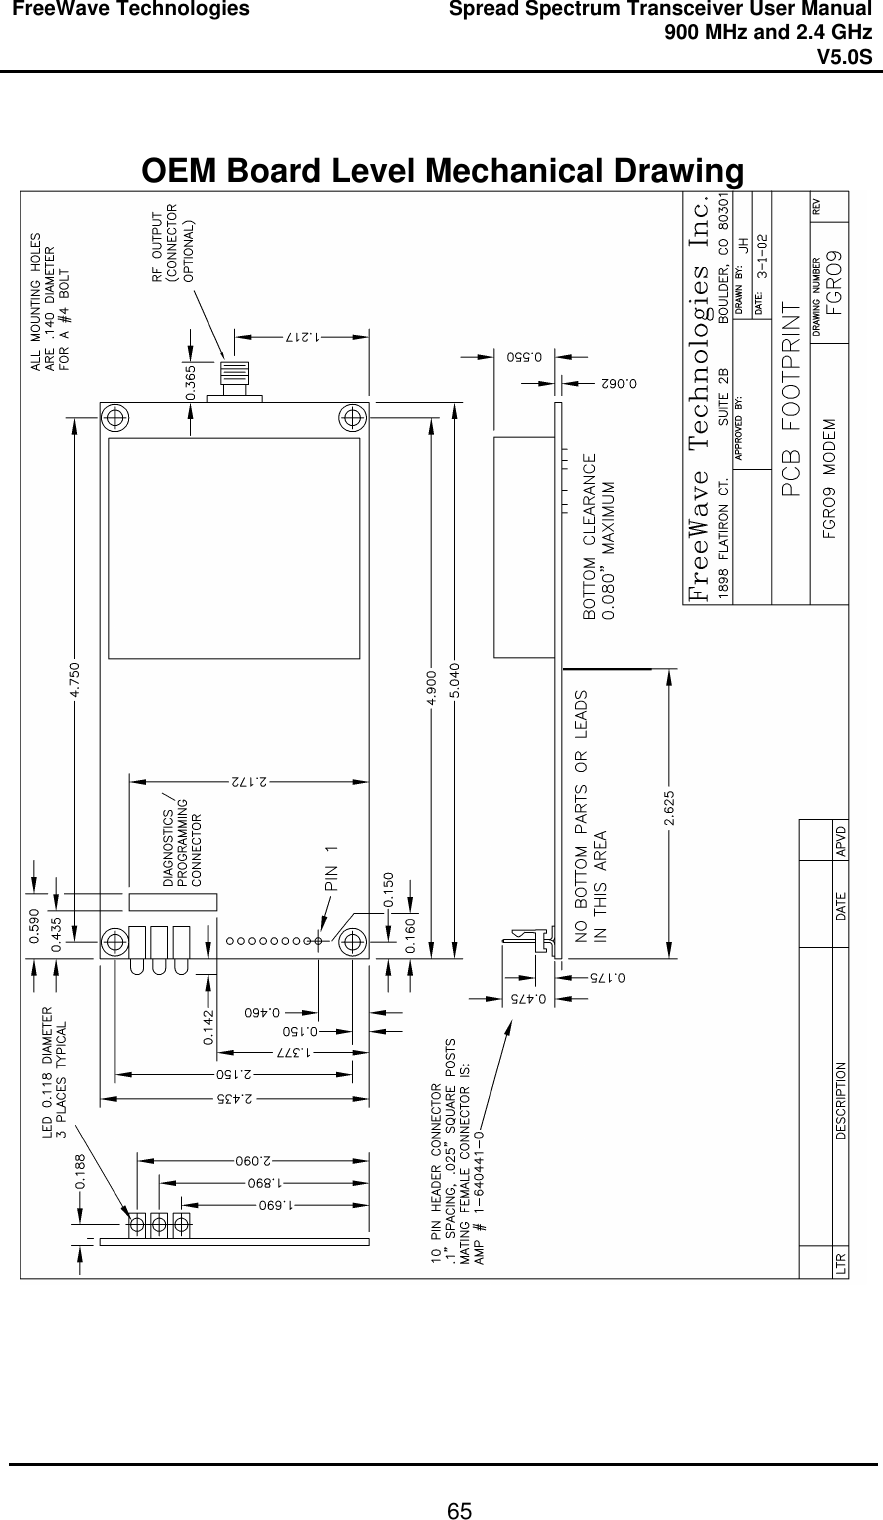 FreeWave Technologies Spread Spectrum Transceiver User Manual 900 MHz and 2.4 GHz V5.0S   65 OEM Board Level Mechanical Drawing    